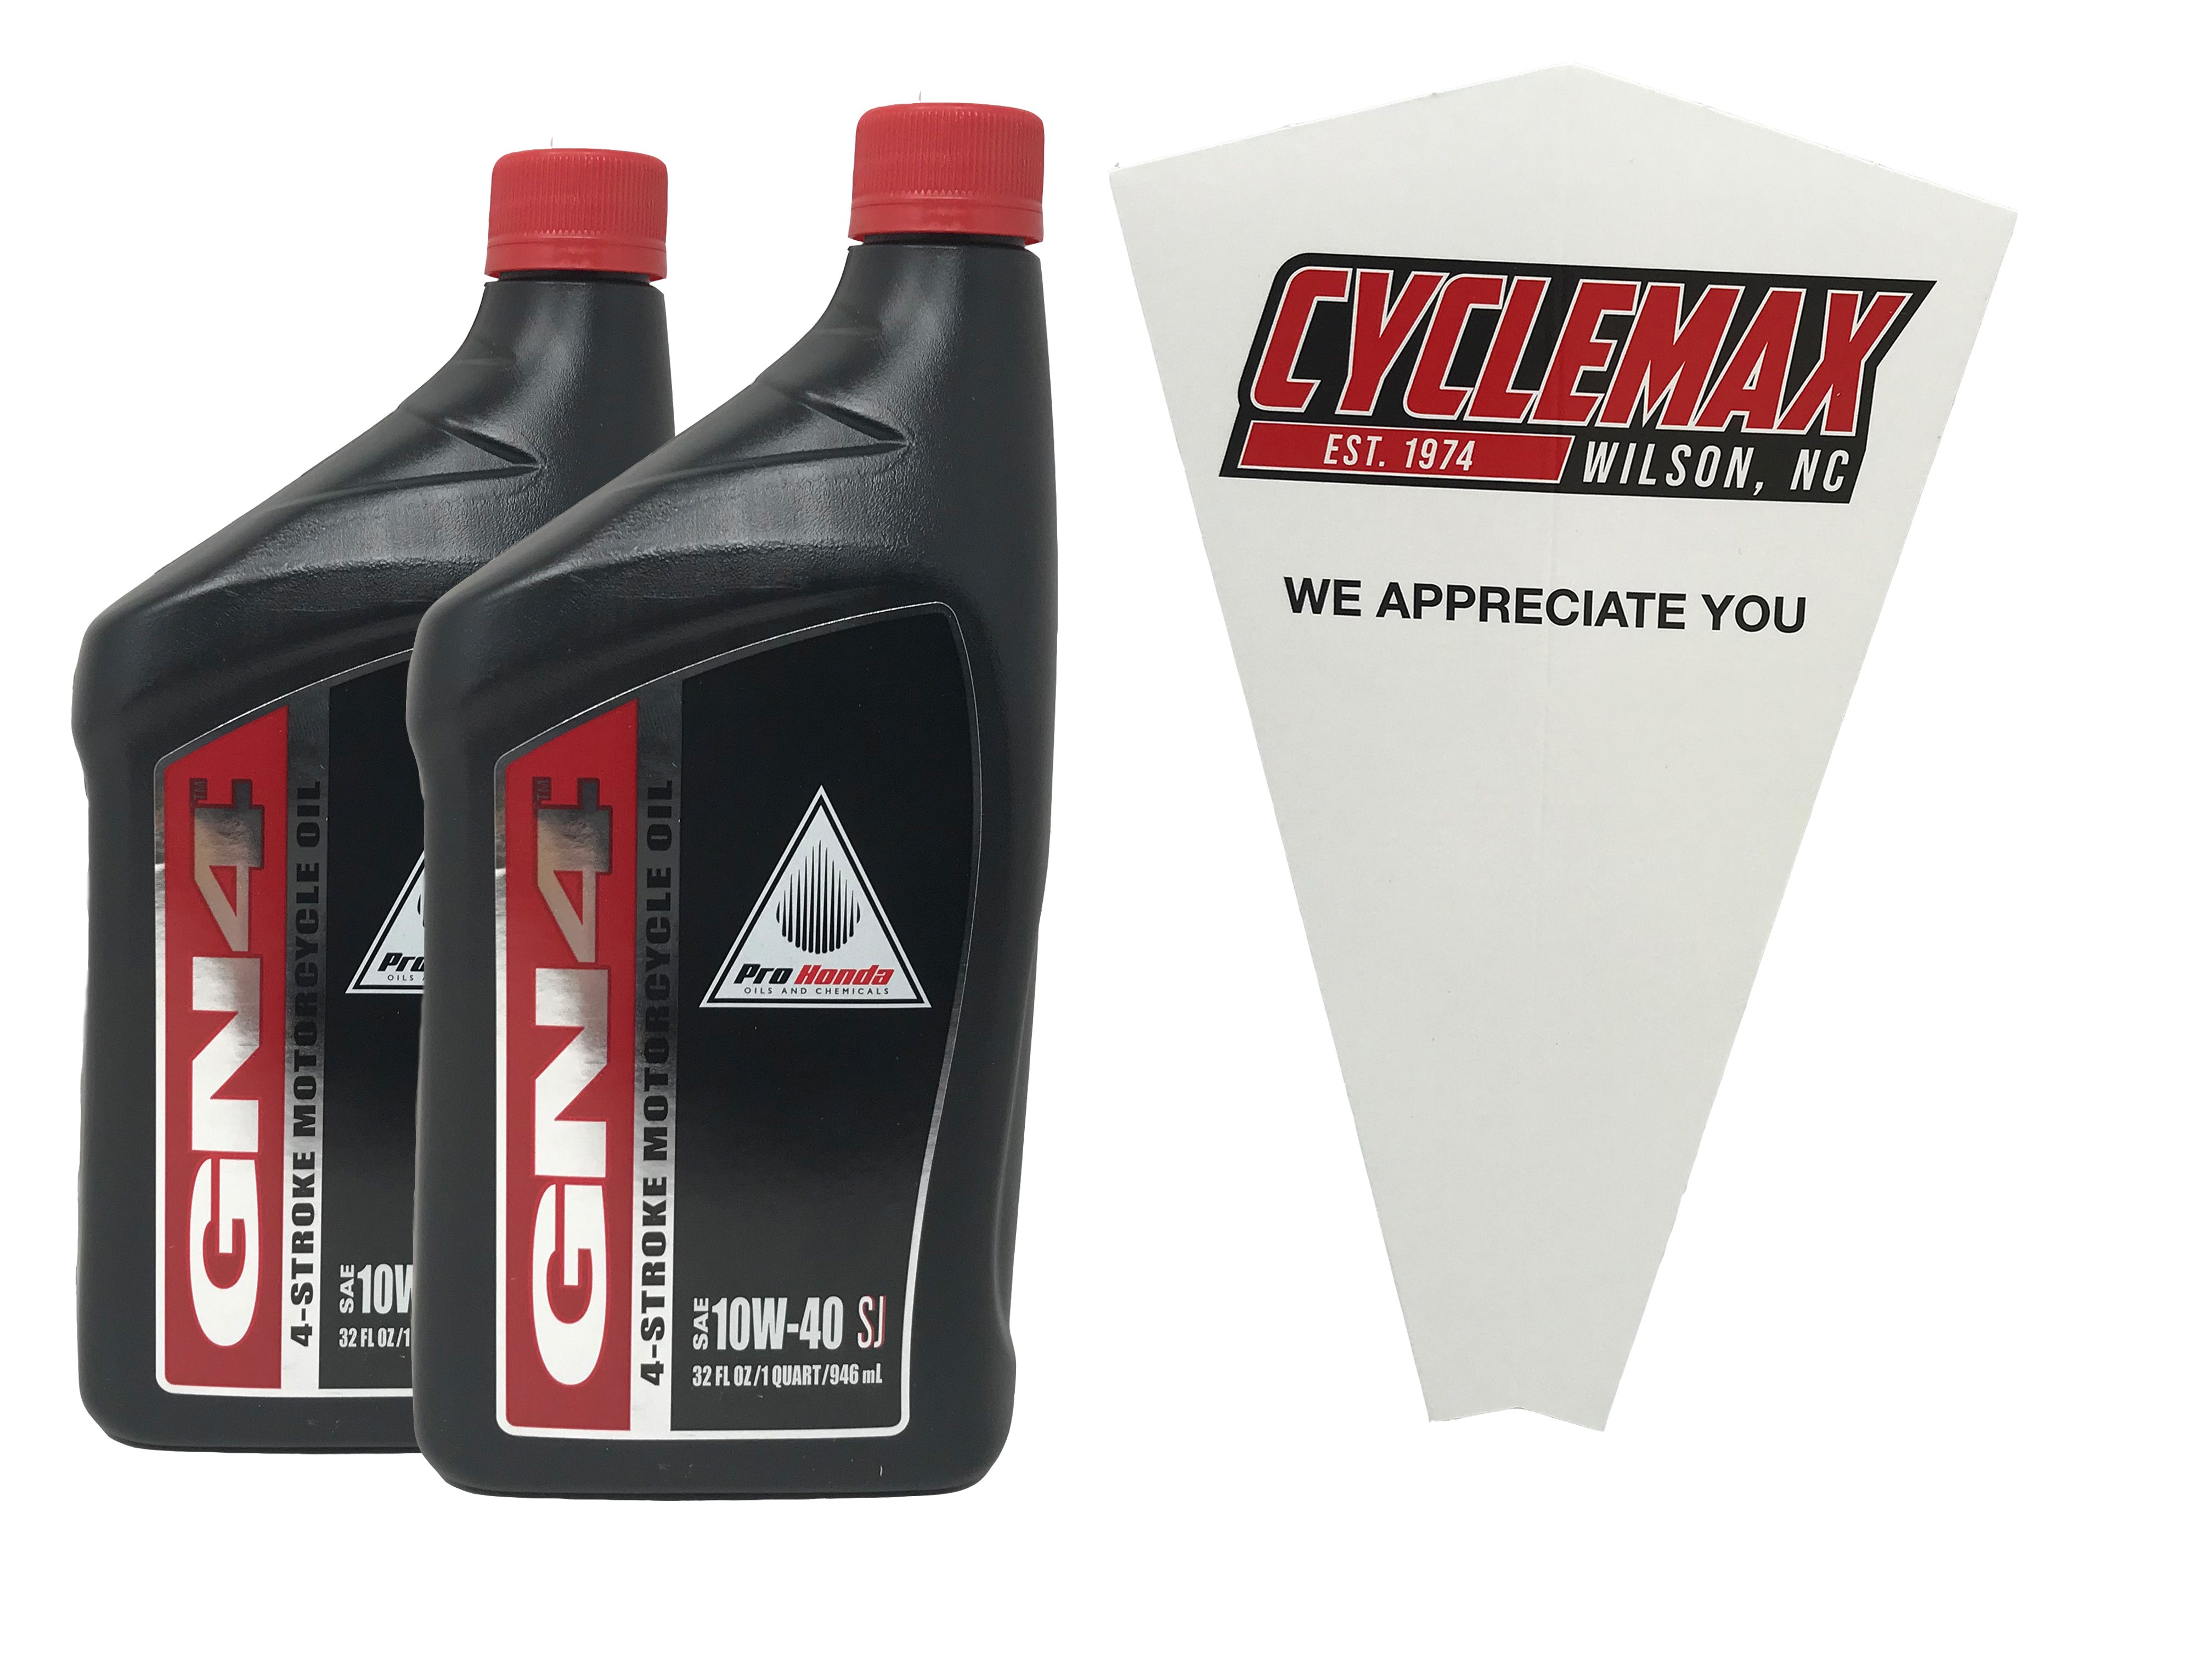 Cyclemax Two Pack for Honda GN4 Engine 10W-40 Oil 08C35-A141M01 Contains Two Quarts and a Funnel